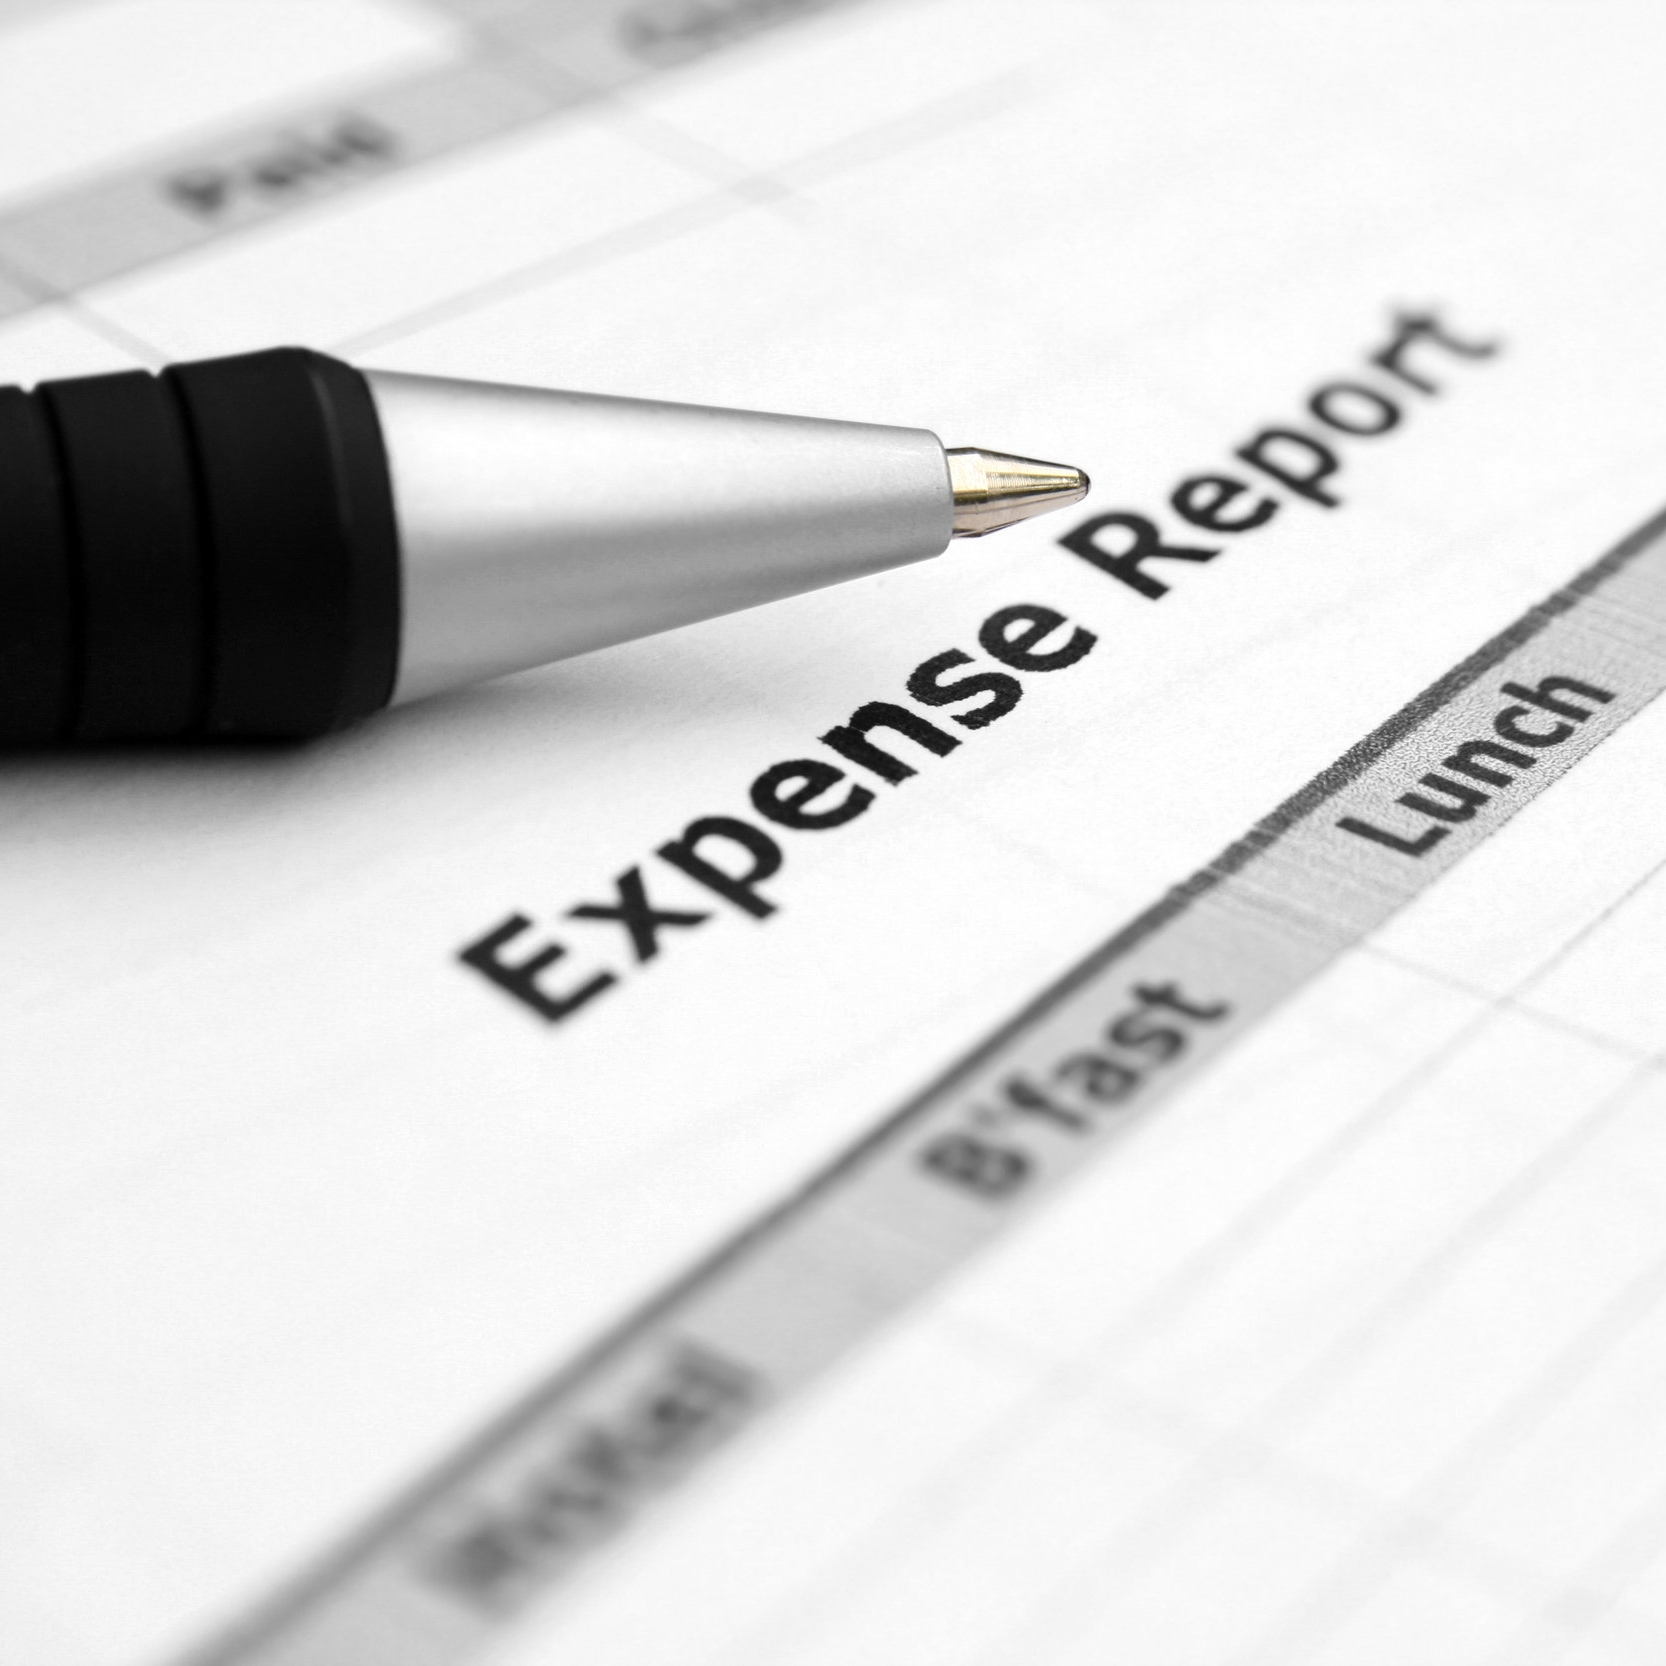 EXPENSE FORMS